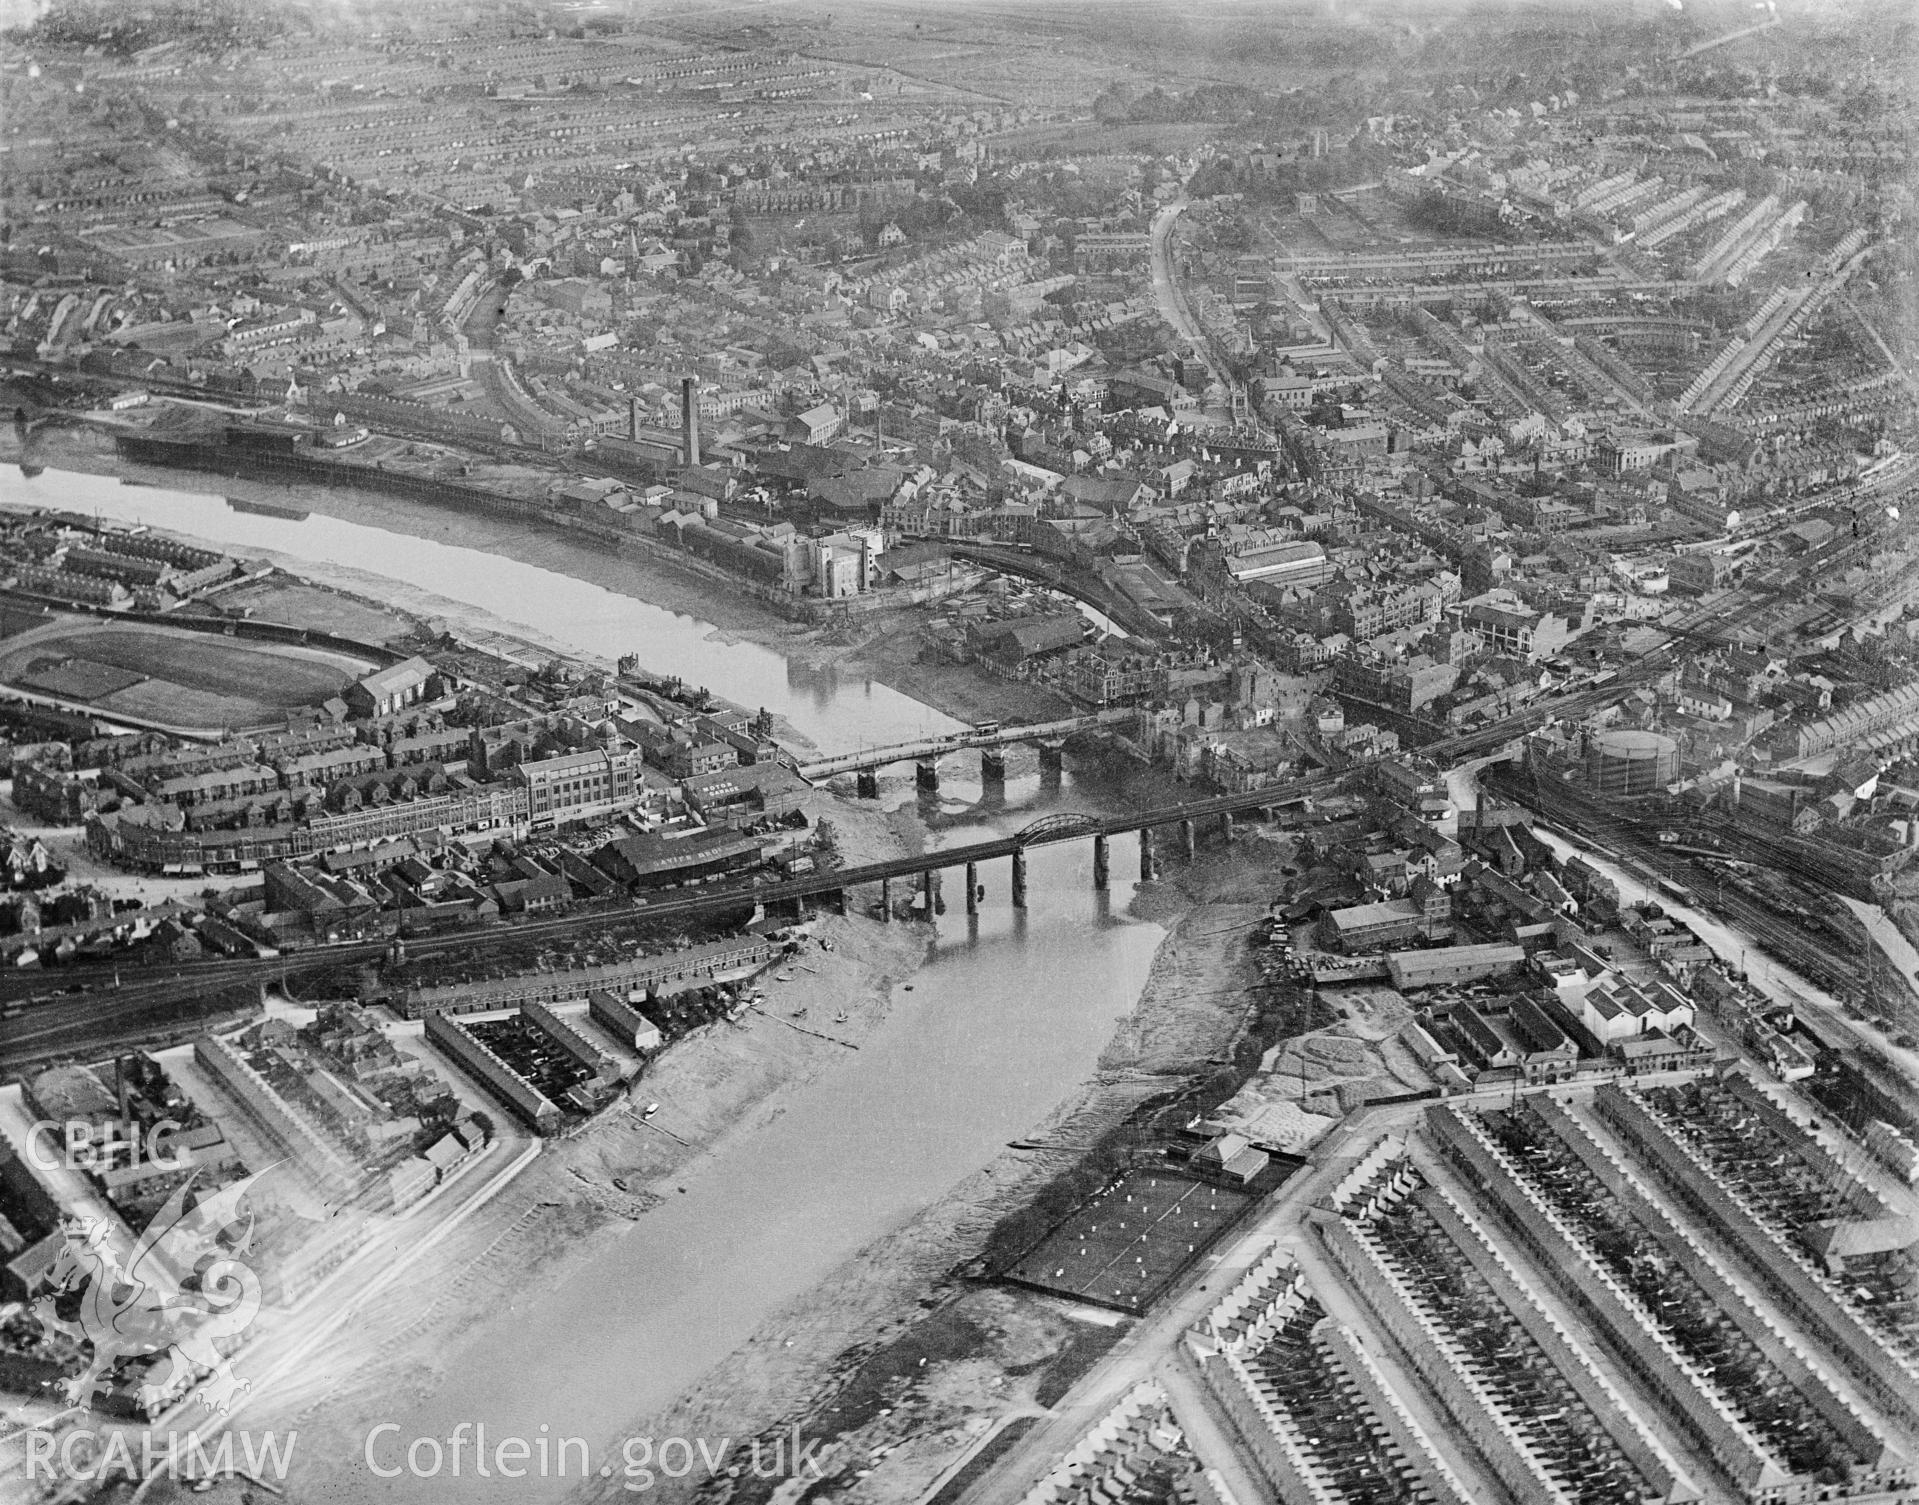 Black and white oblique aerial photograph showing Newport, Gwent, from Aerofilms album Monmouth N-Pe (448), taken by Aerofilms Ltd and dated 1920.